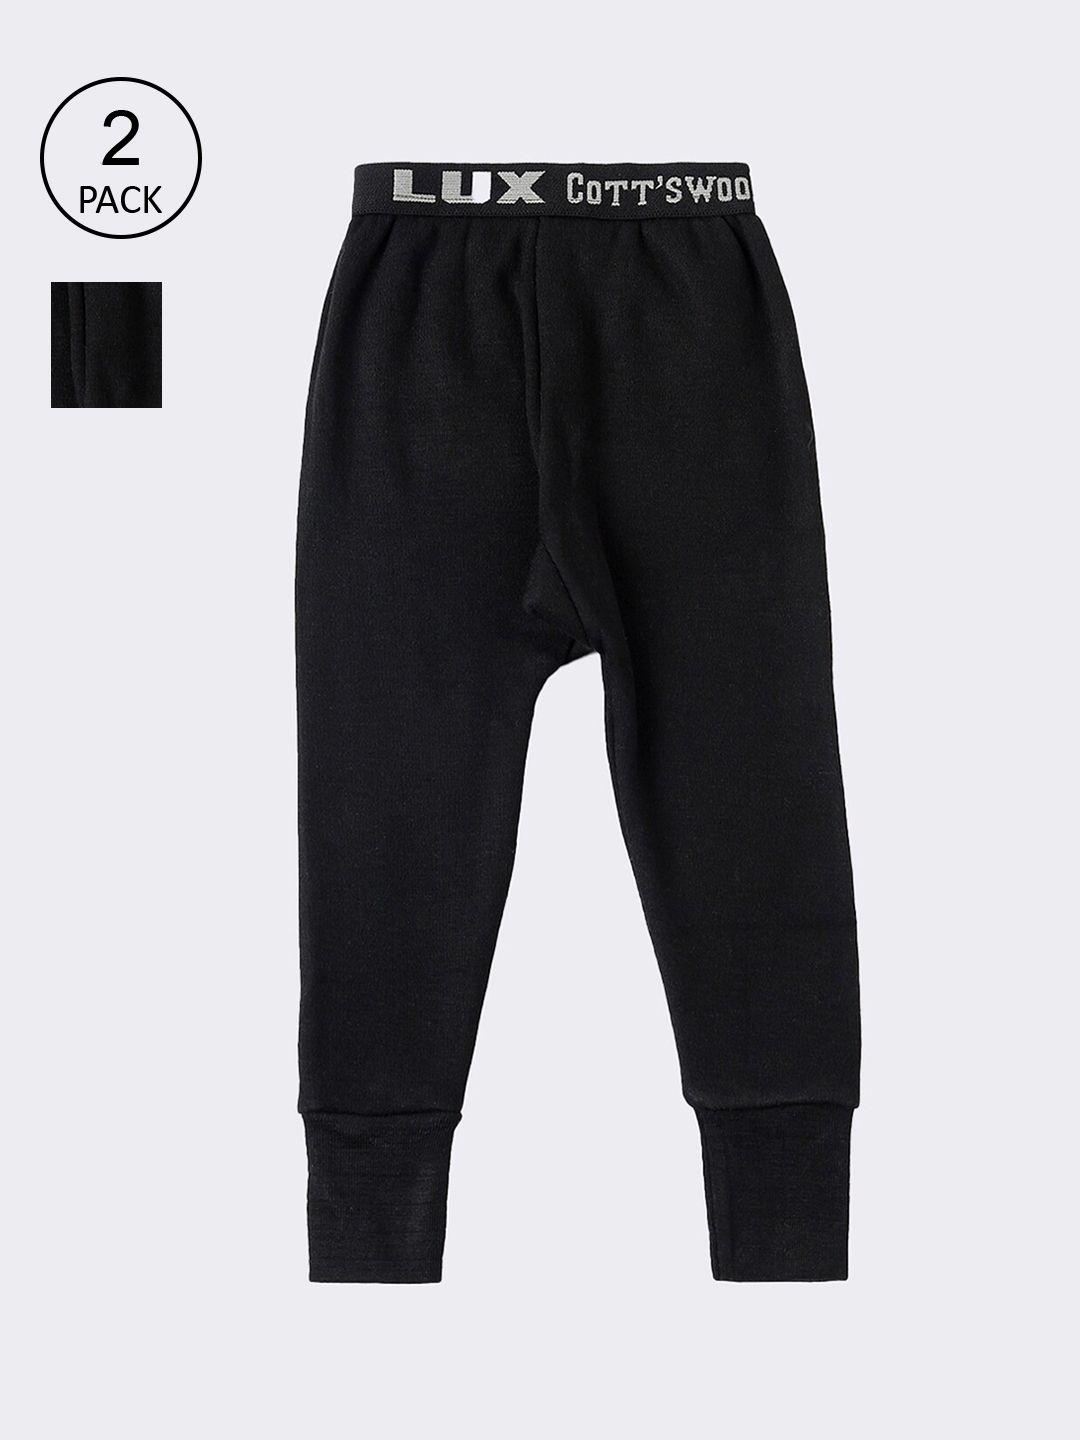 lux cottswool boys pack of 2 black solid knitted cotton thermal bottoms